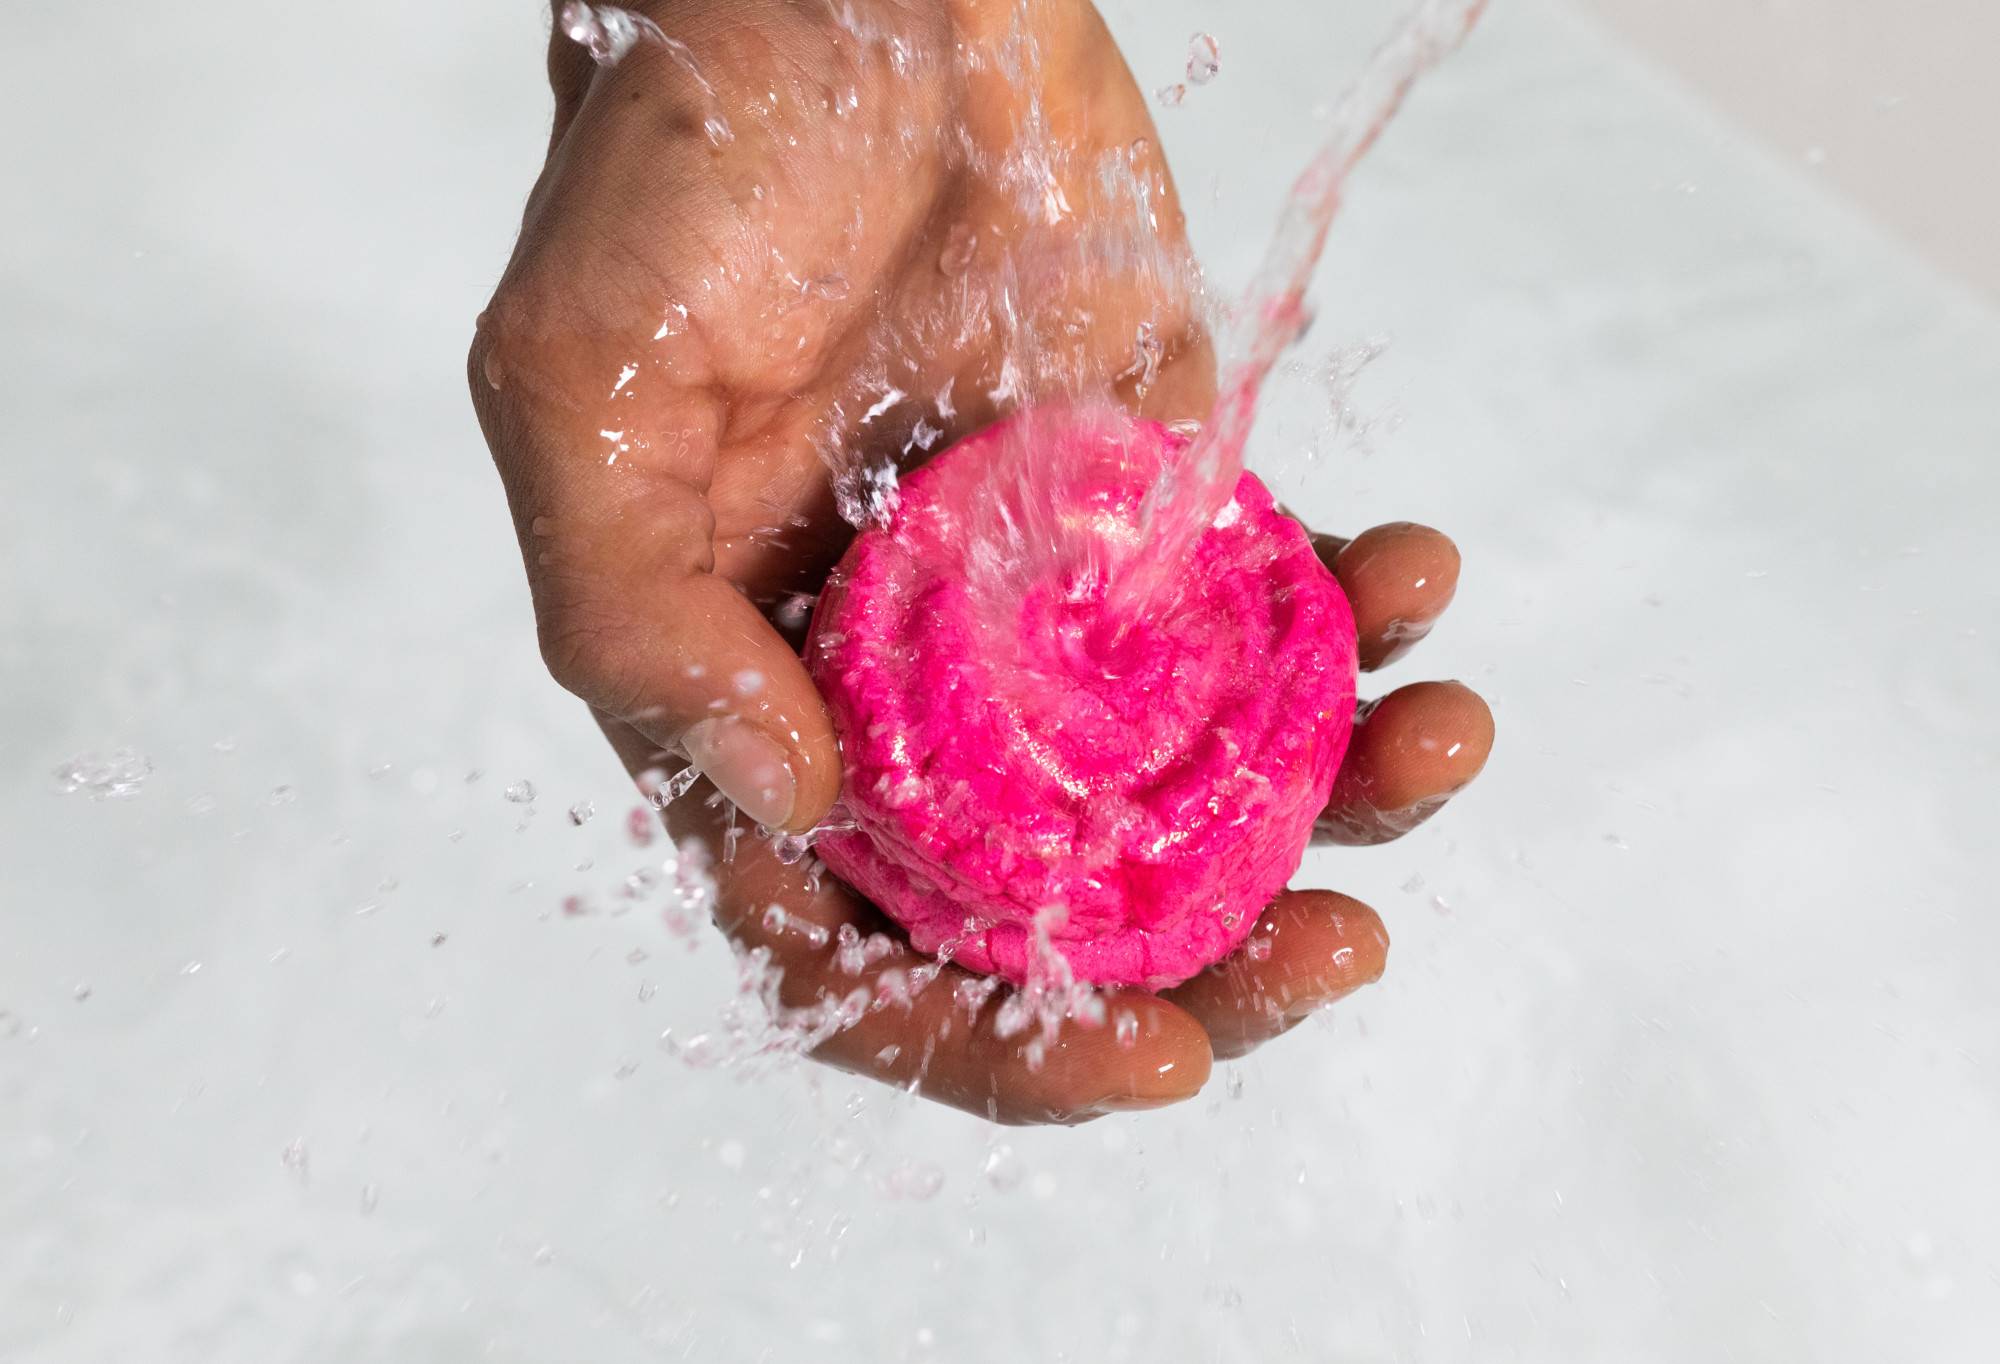 A hand holds Rose Jam under running water as the water bounces off. The background is clear water.